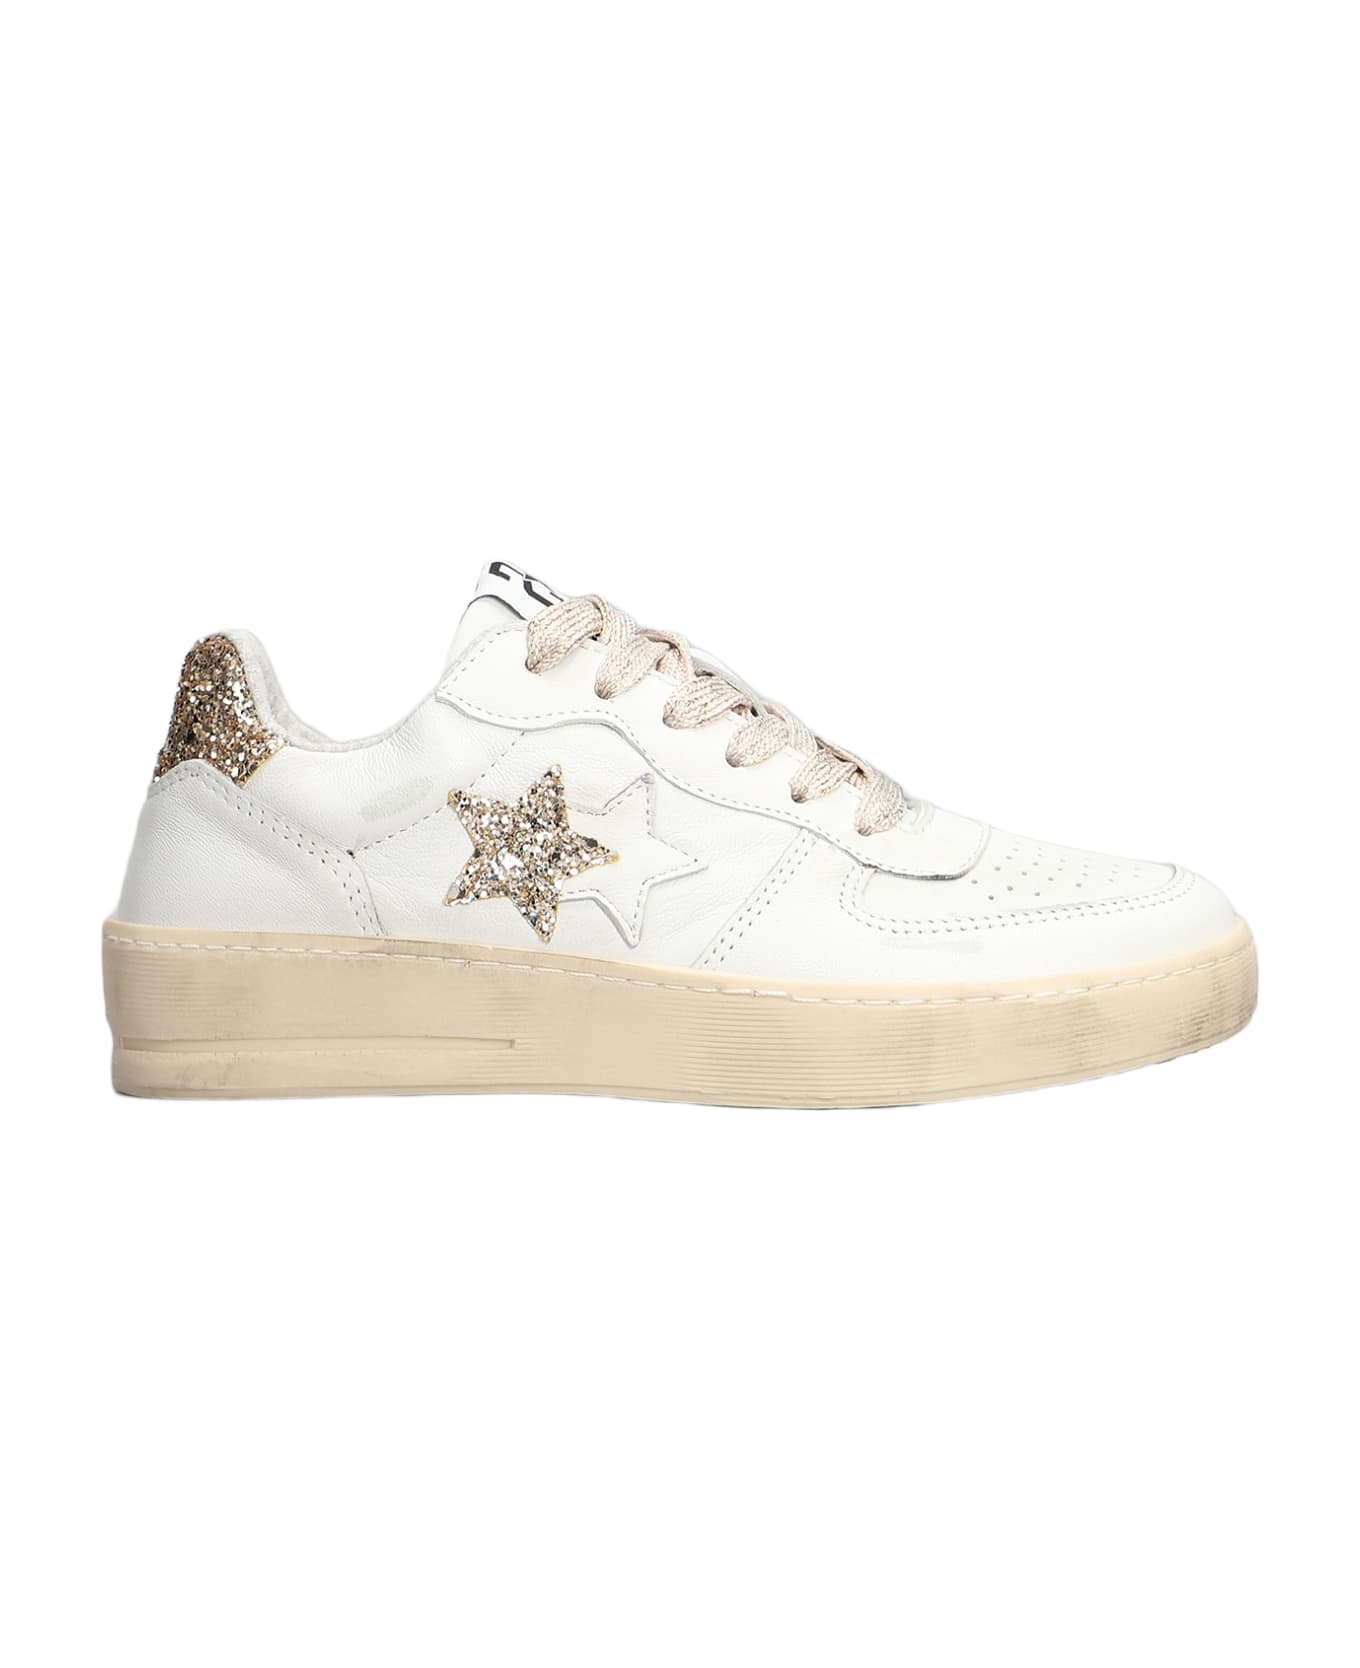 2Star Padel Star Sneakers In White Leather - white スニーカー